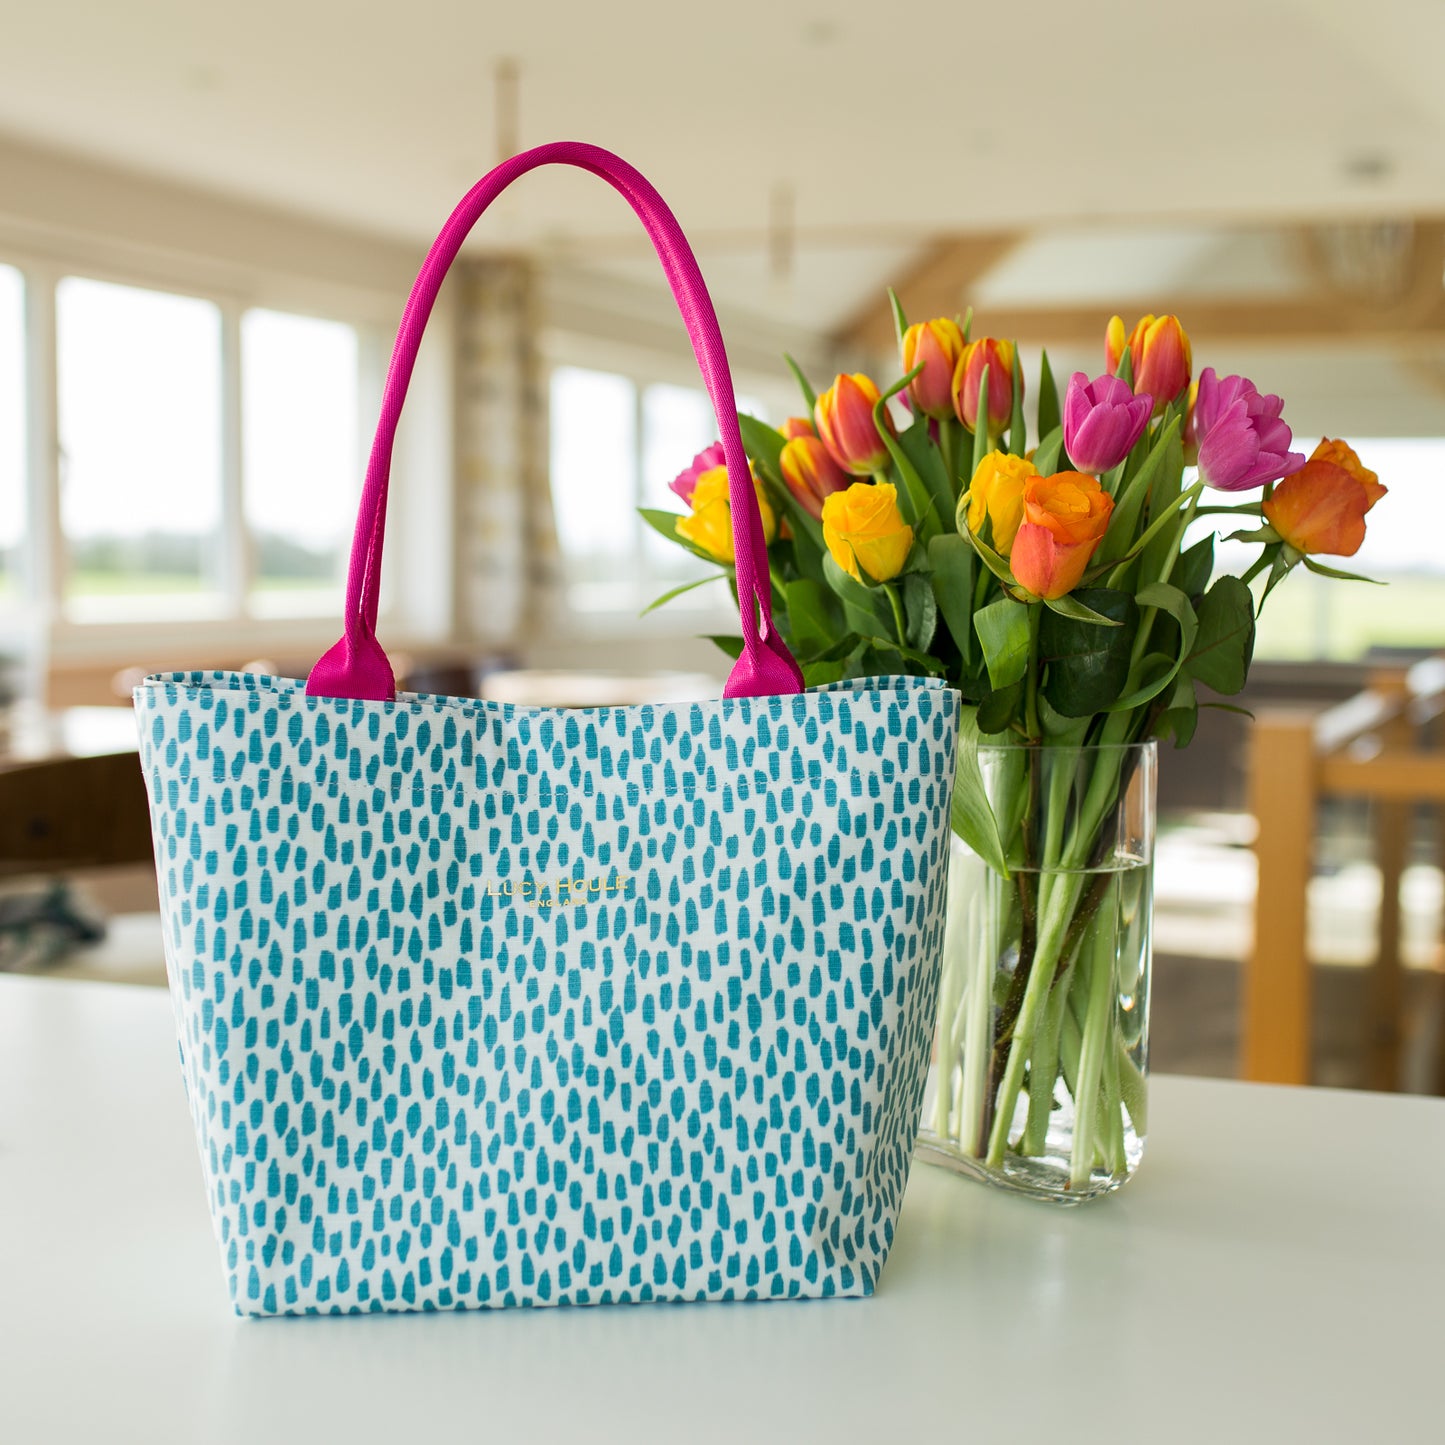 Aqua Cobblestone Small Tote Bag with Hot Pink Handles 'Limited Edition'